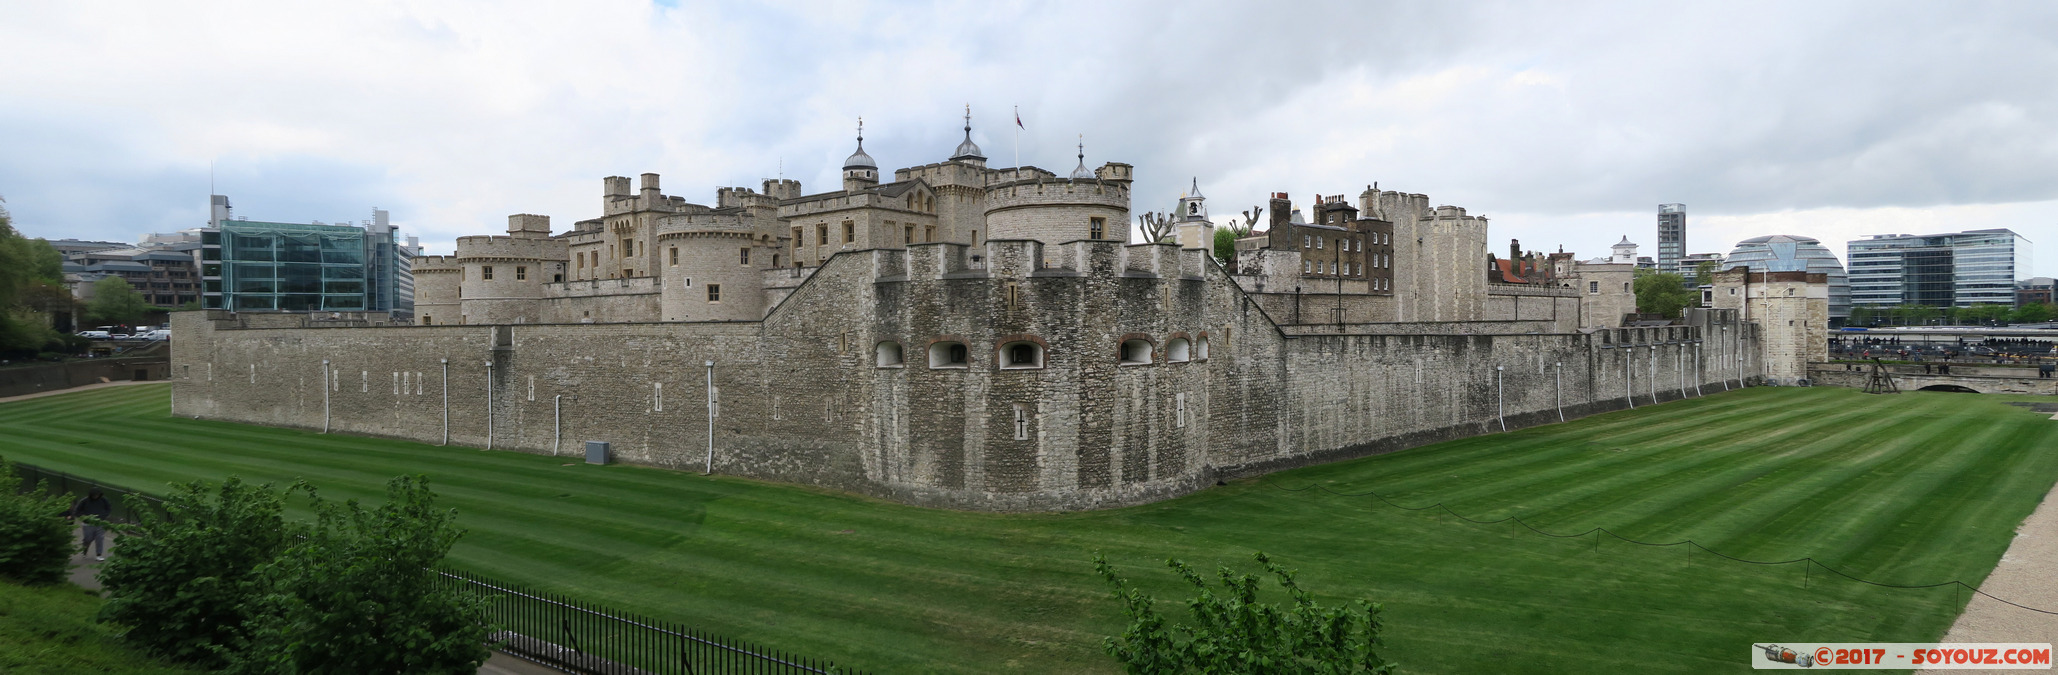 The Tower of London - panorama
Mots-clés: England GBR geo:lat=51.50932167 geo:lon=-0.07756241 geotagged Royaume-Uni St. Katharine's and Wapping Ward Whitechapel London Londres Tower of London chateau Tower Hamlets panorama patrimoine unesco